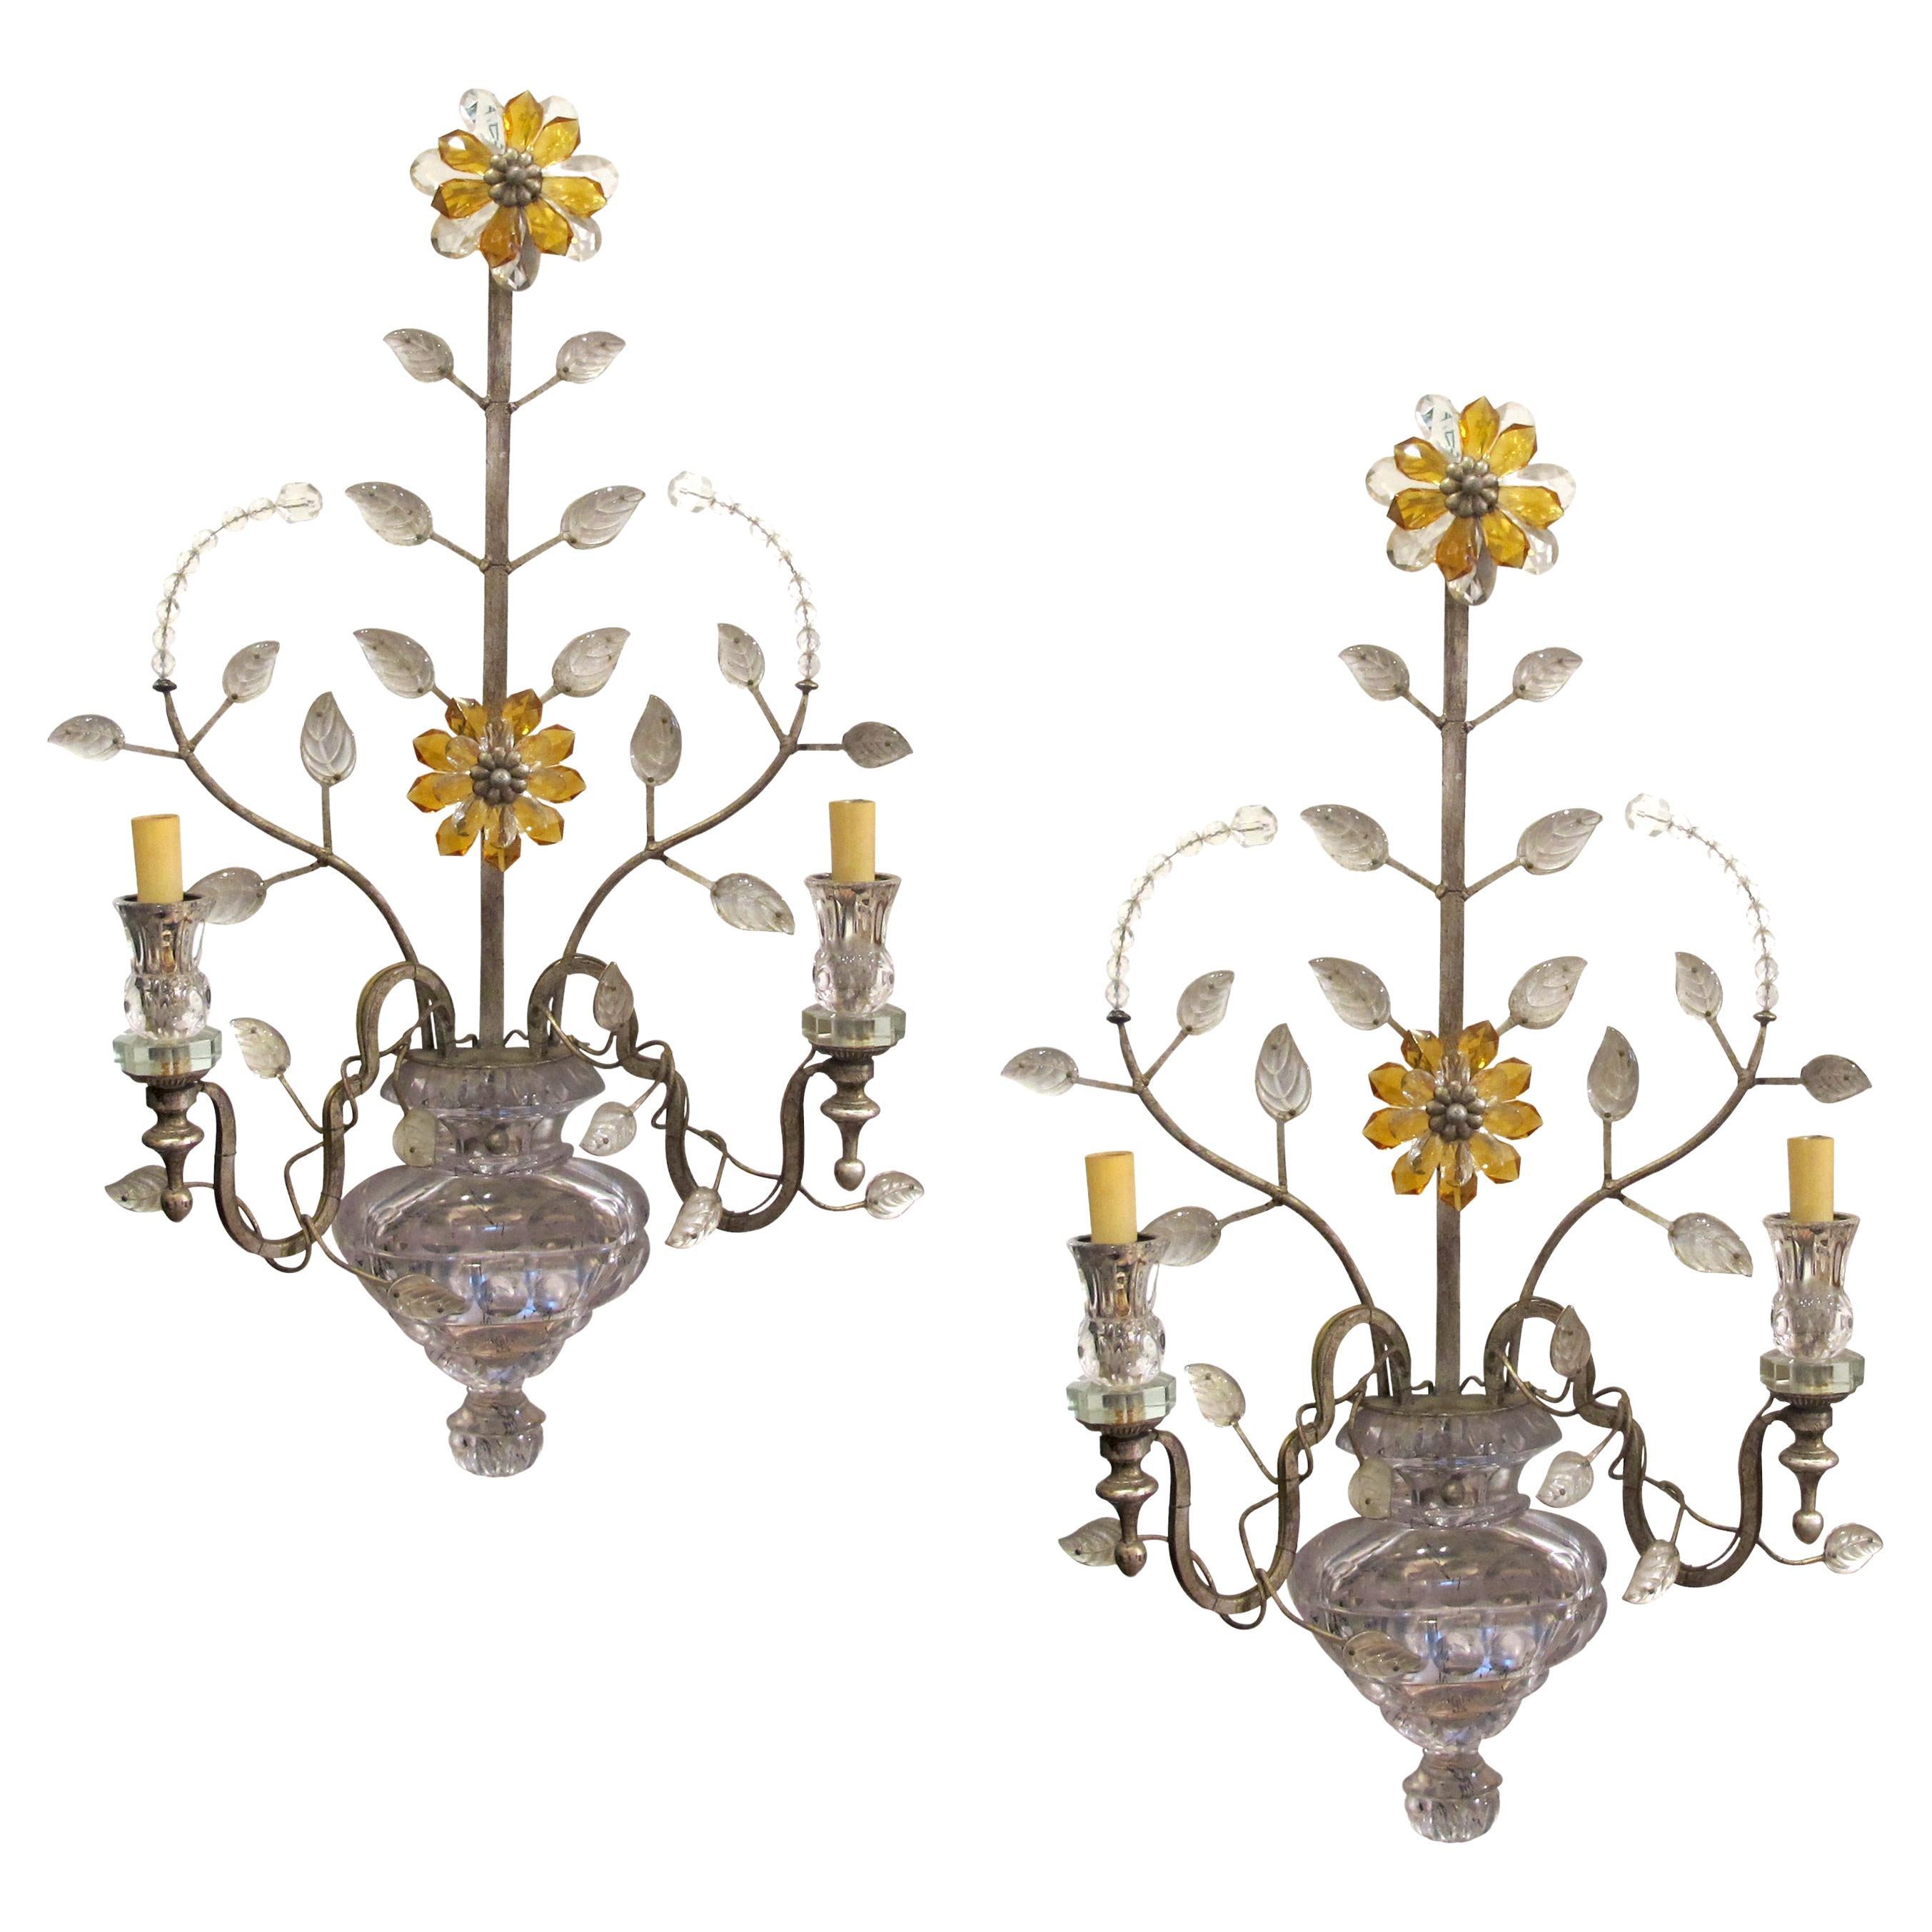 Pair of 1970s Italian Silver Gilt Iron & Crystal Wall Lights by Banci Firenze